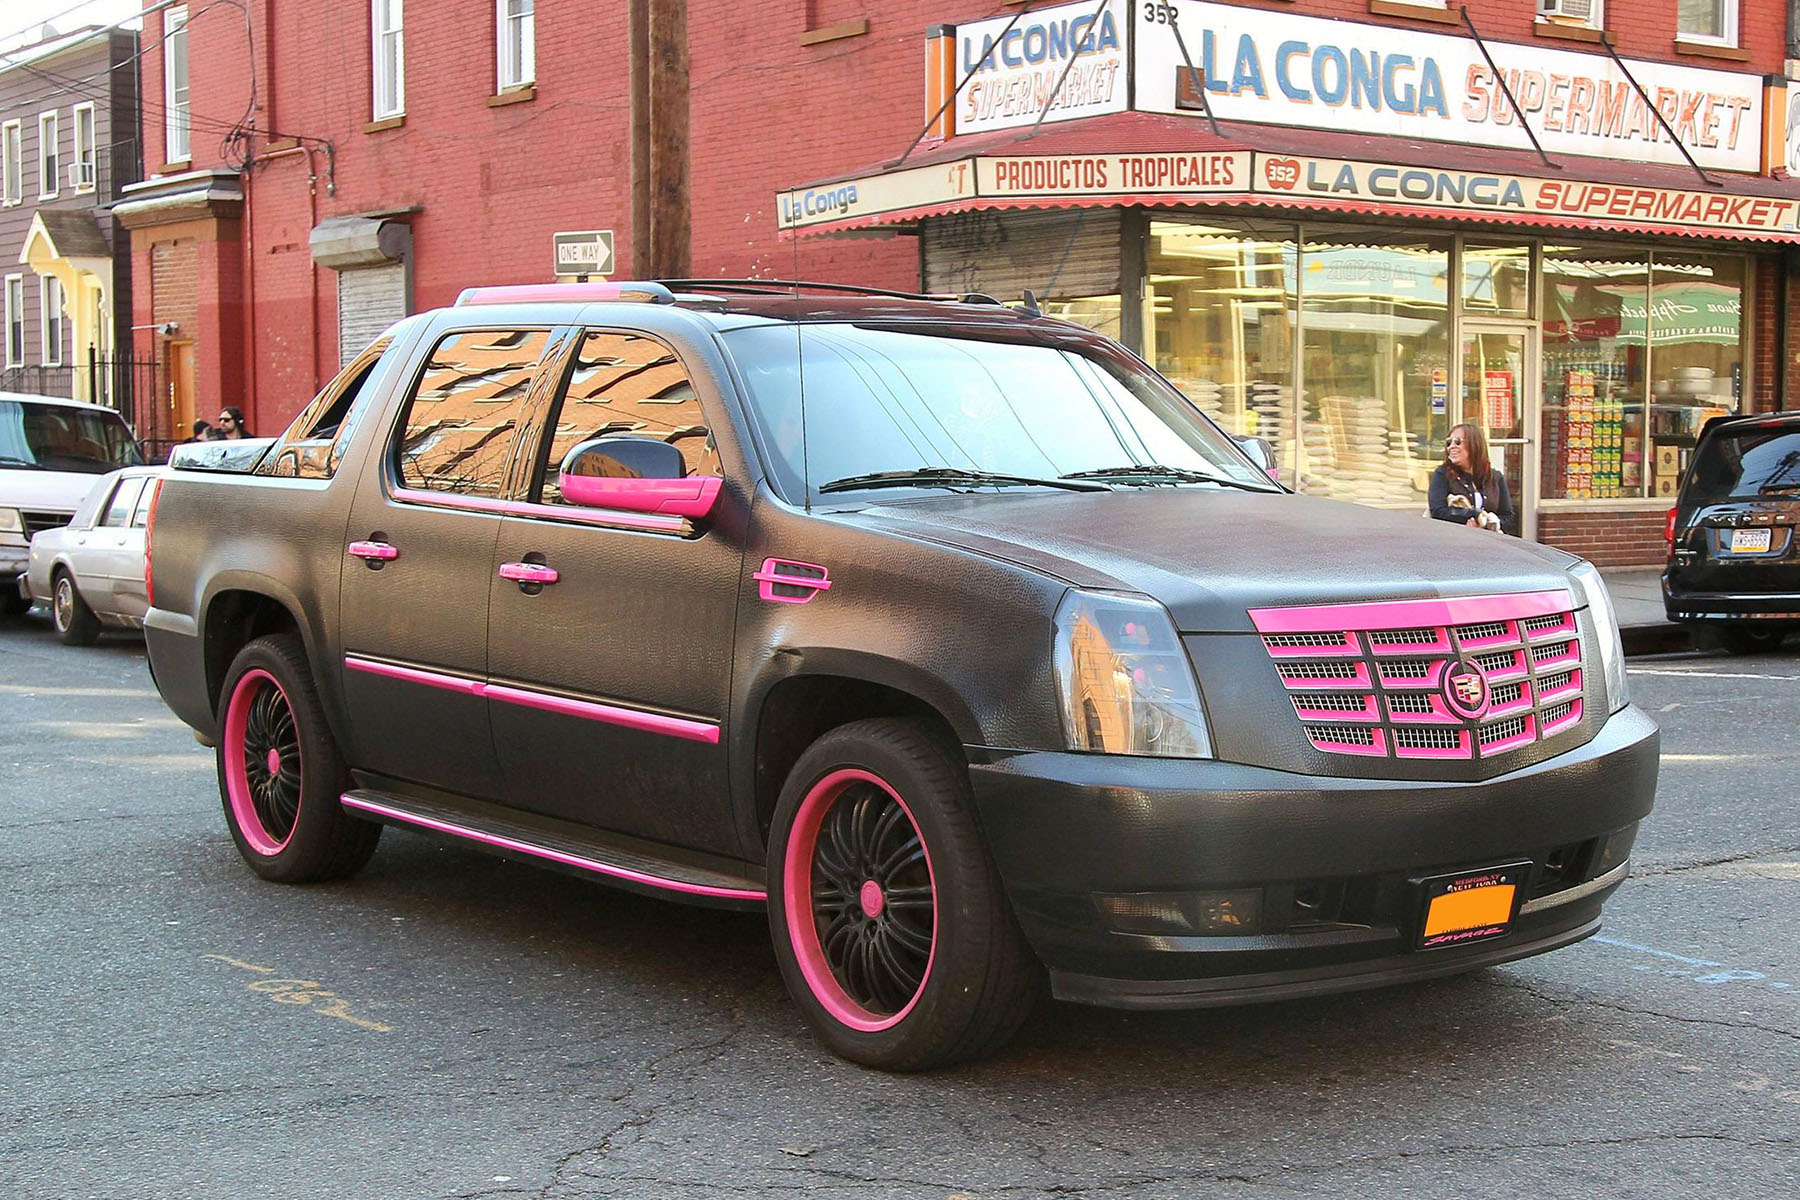 A Cadillac Escalade EXT is, frankly, not that classy a rig to begin with. So it’s little surprise that when you add a reality TV “star” Nicole “Snooki” Polizzi and a Caddy pickup together you get something like this. The funniest part? She sold it! Someone else actually paid to buy this monstrosity.